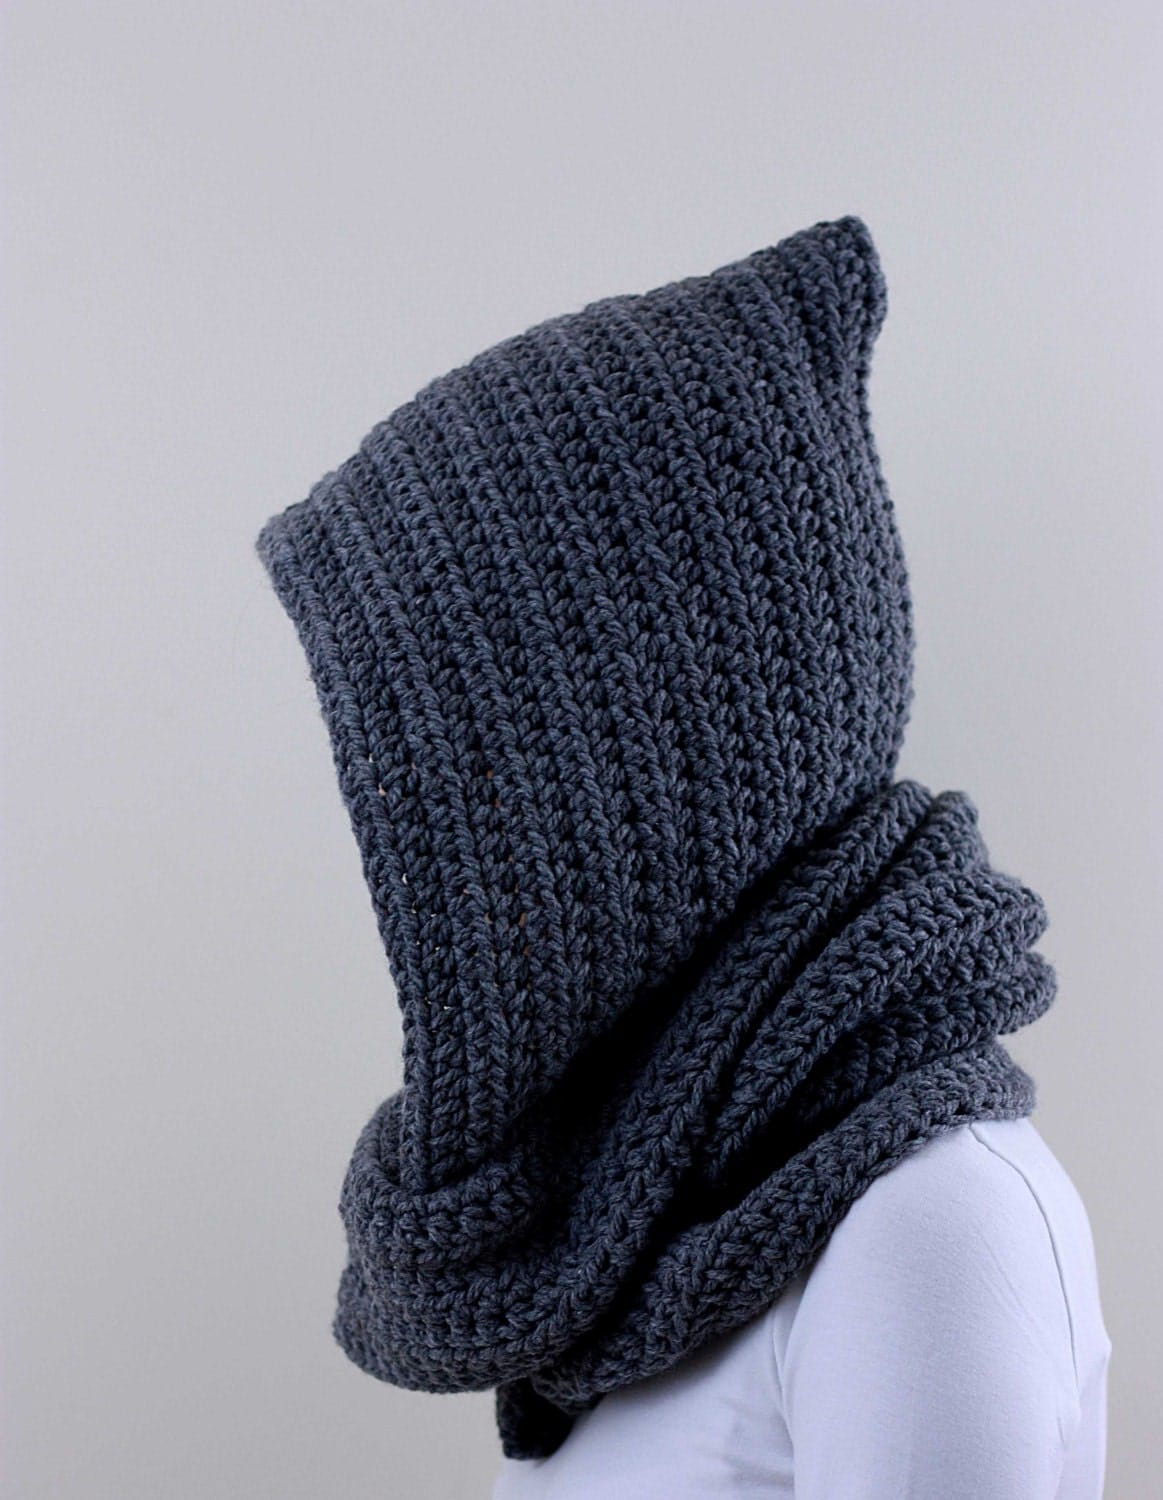 by Hooded Mens scarf Hooded Hooded Womens Scarf Gray  zukas Scarf Scarf hooded mens